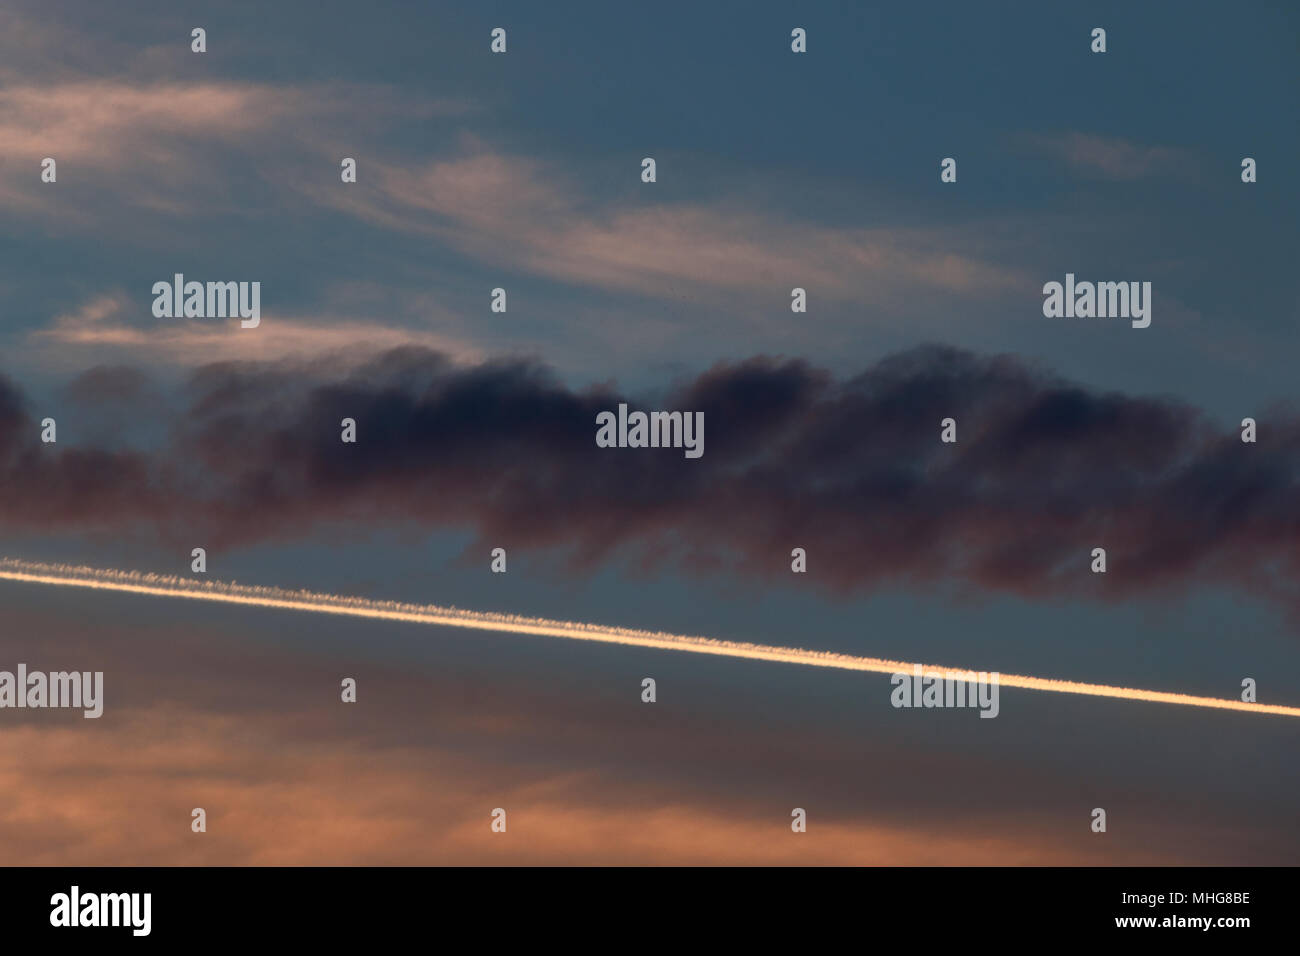 Plane trail at the sunset in the Roman sky, the saturated color clouds against the white diagonal line ,graphic effect Stock Photo